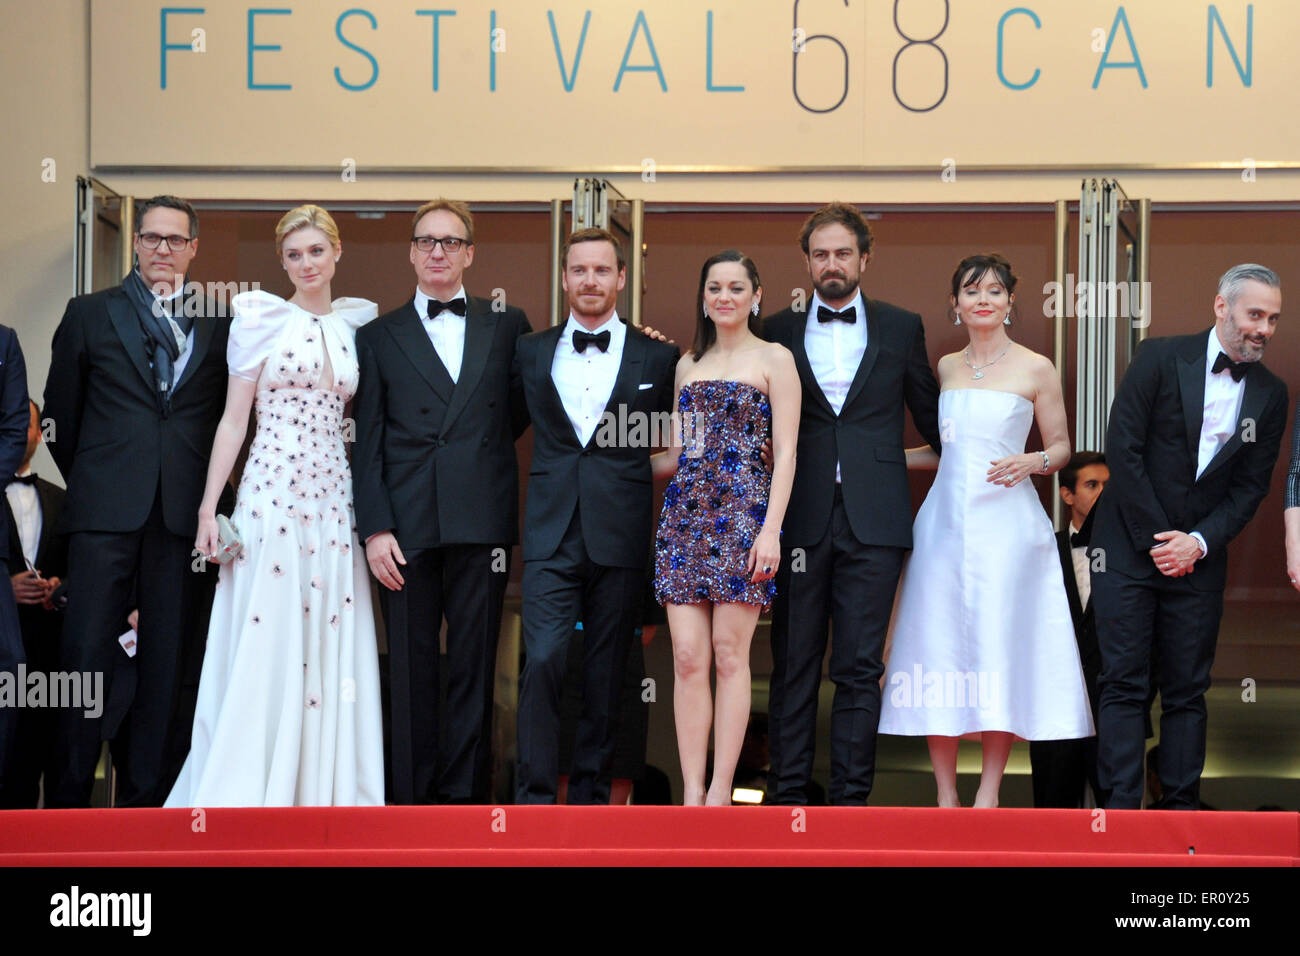 Cannes, France. 23rd May, 2015. Guest, Elizabeth Debriki, David Thewlis, Michael Fassbender, Marion Cotillard, Justin Kurzel, Essie Davis and Iain Canning attending the 'Macbeth' premiere at the 68th Cannes Film Festival on May 23, 2015 Credit:  dpa picture alliance/Alamy Live News Stock Photo